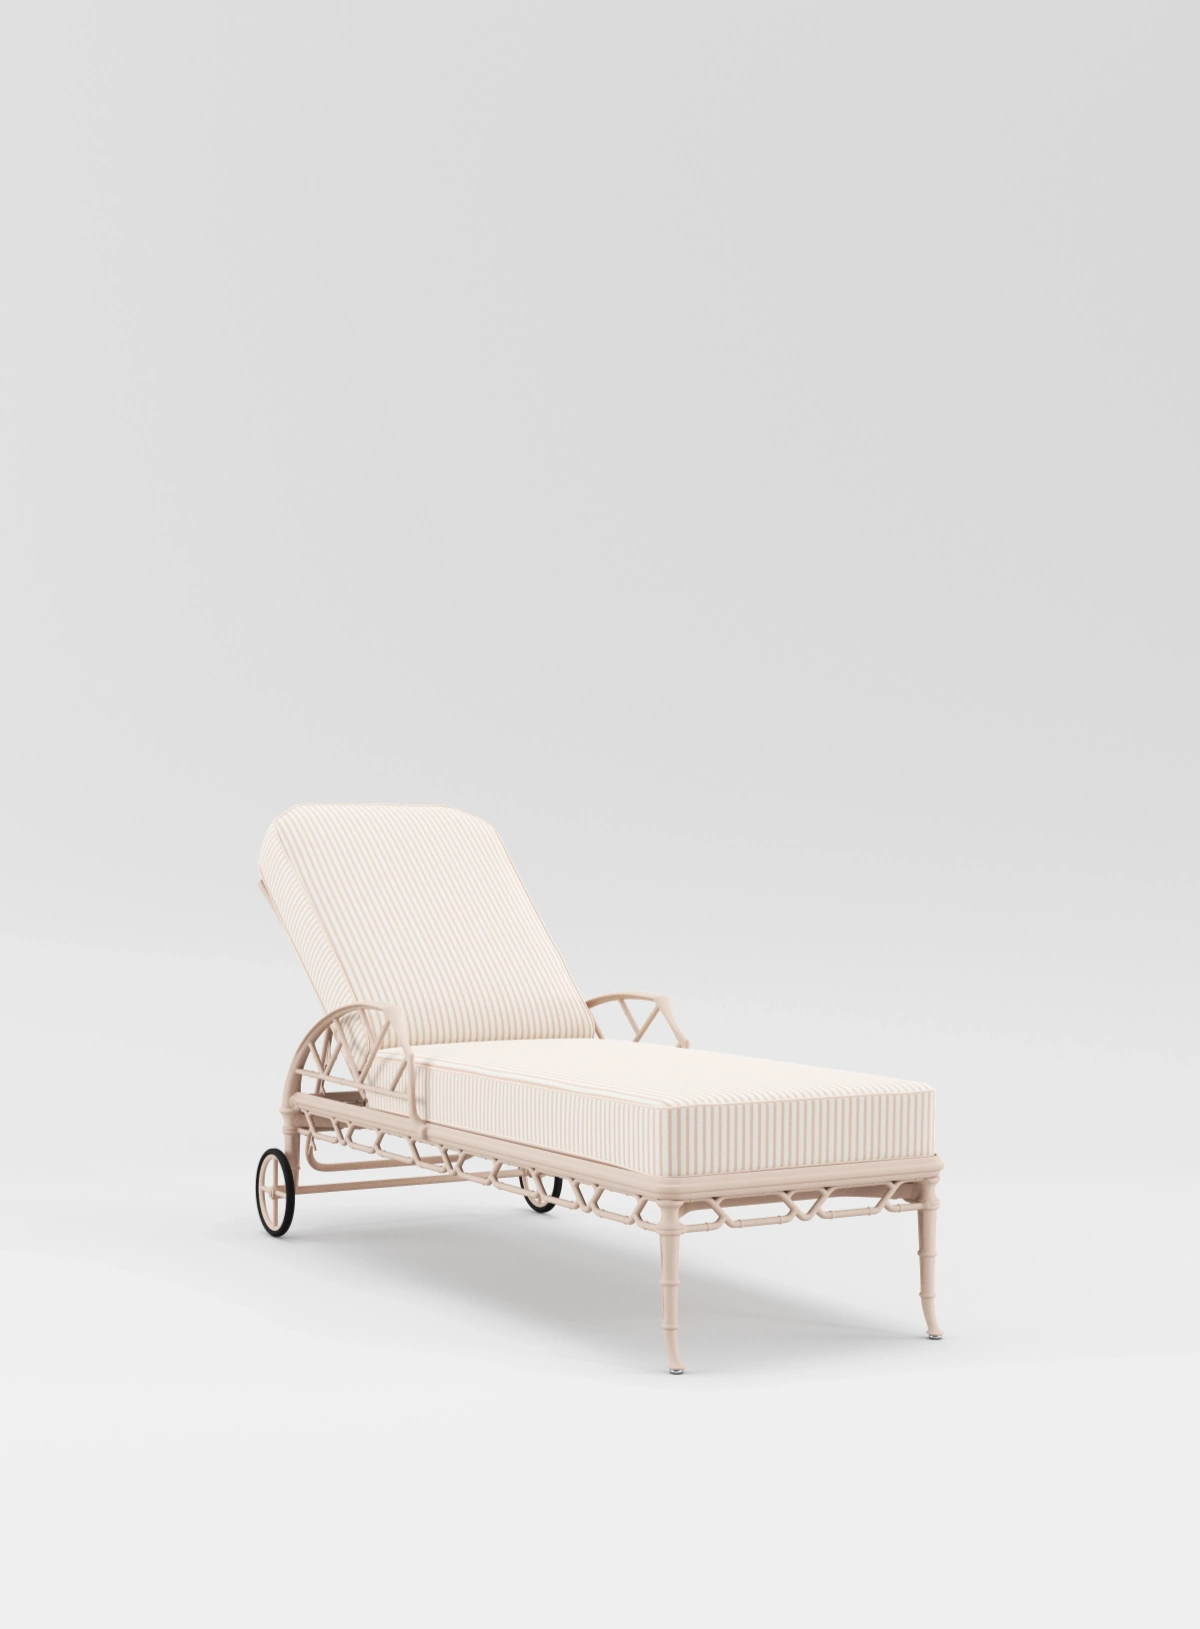 Chaise Lounges - All View Jordan Brown